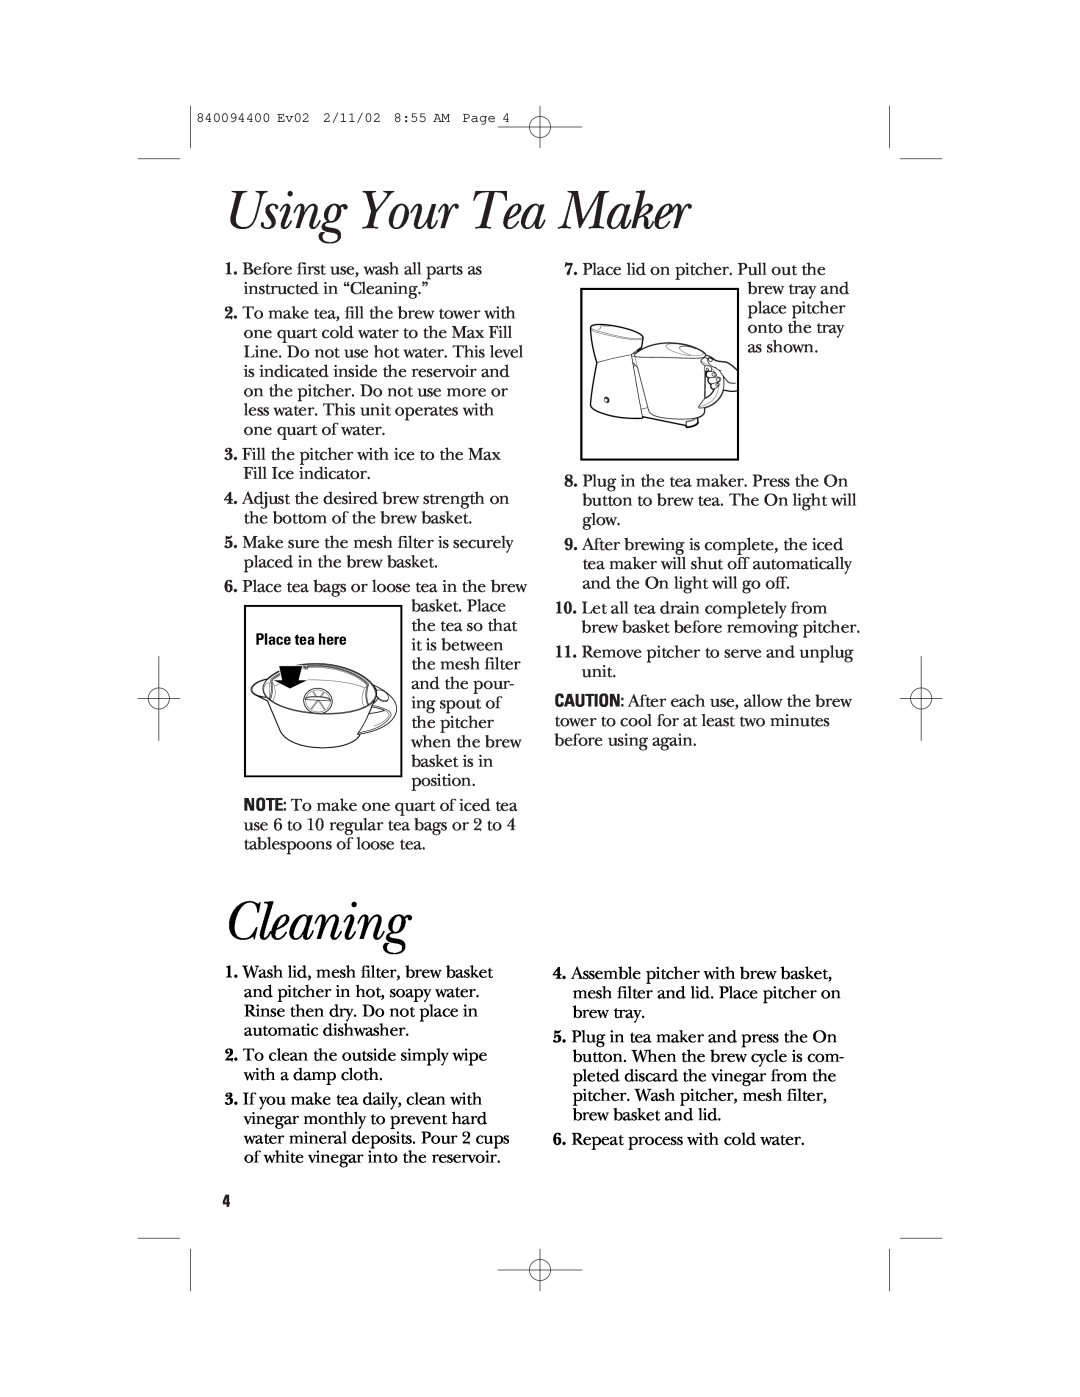 GE 840094400, 106824 manual Using Your Tea Maker, Cleaning 